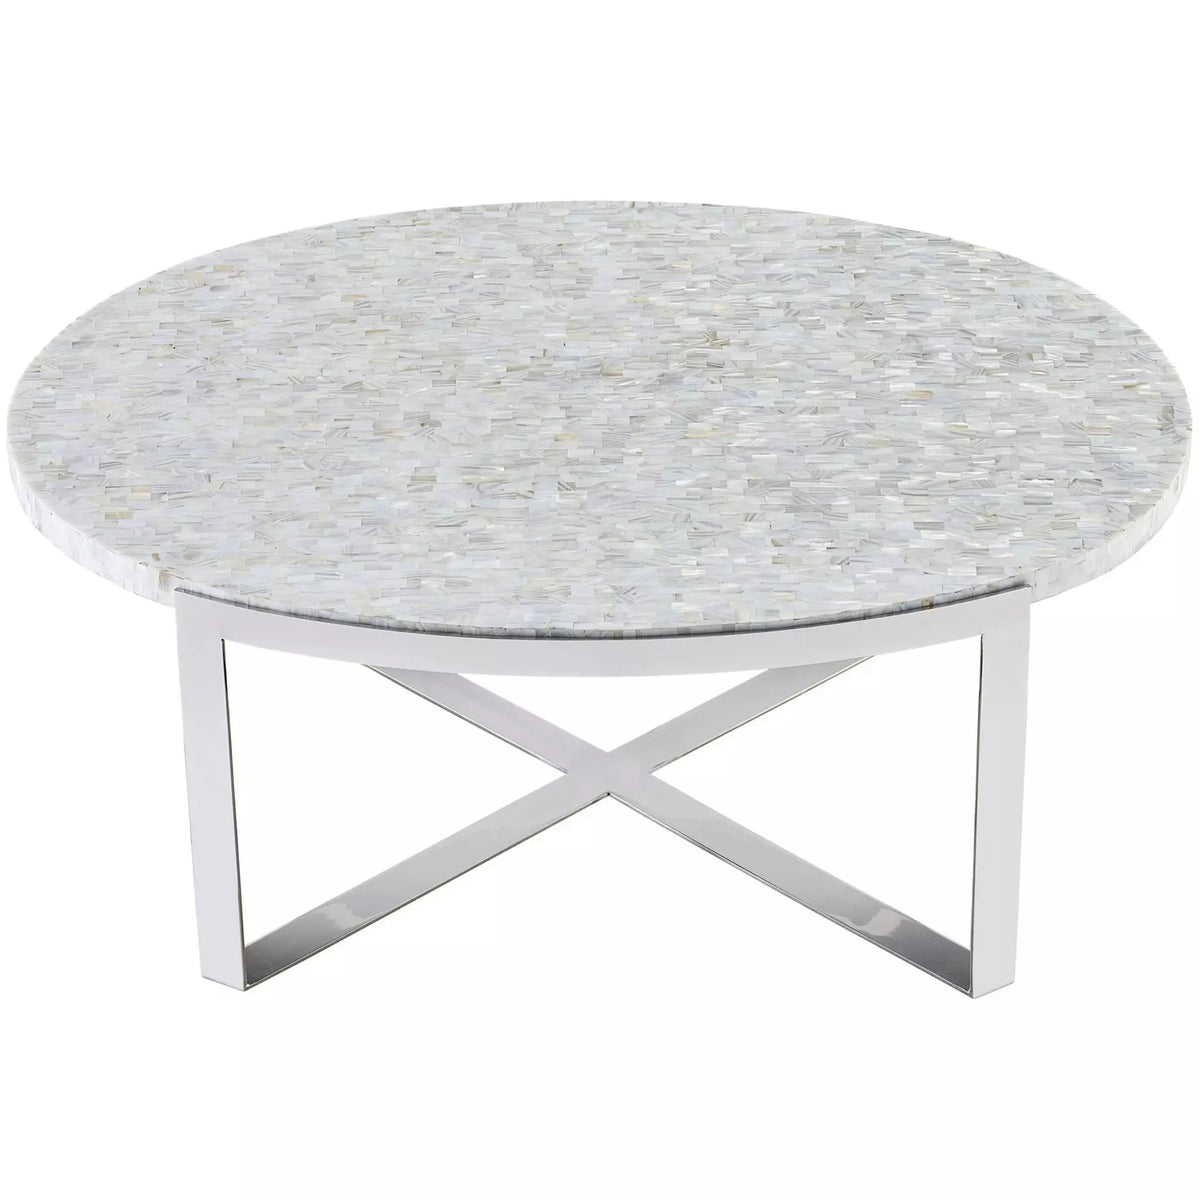 Impressionist Cocktail Table - Be Bold Furniture